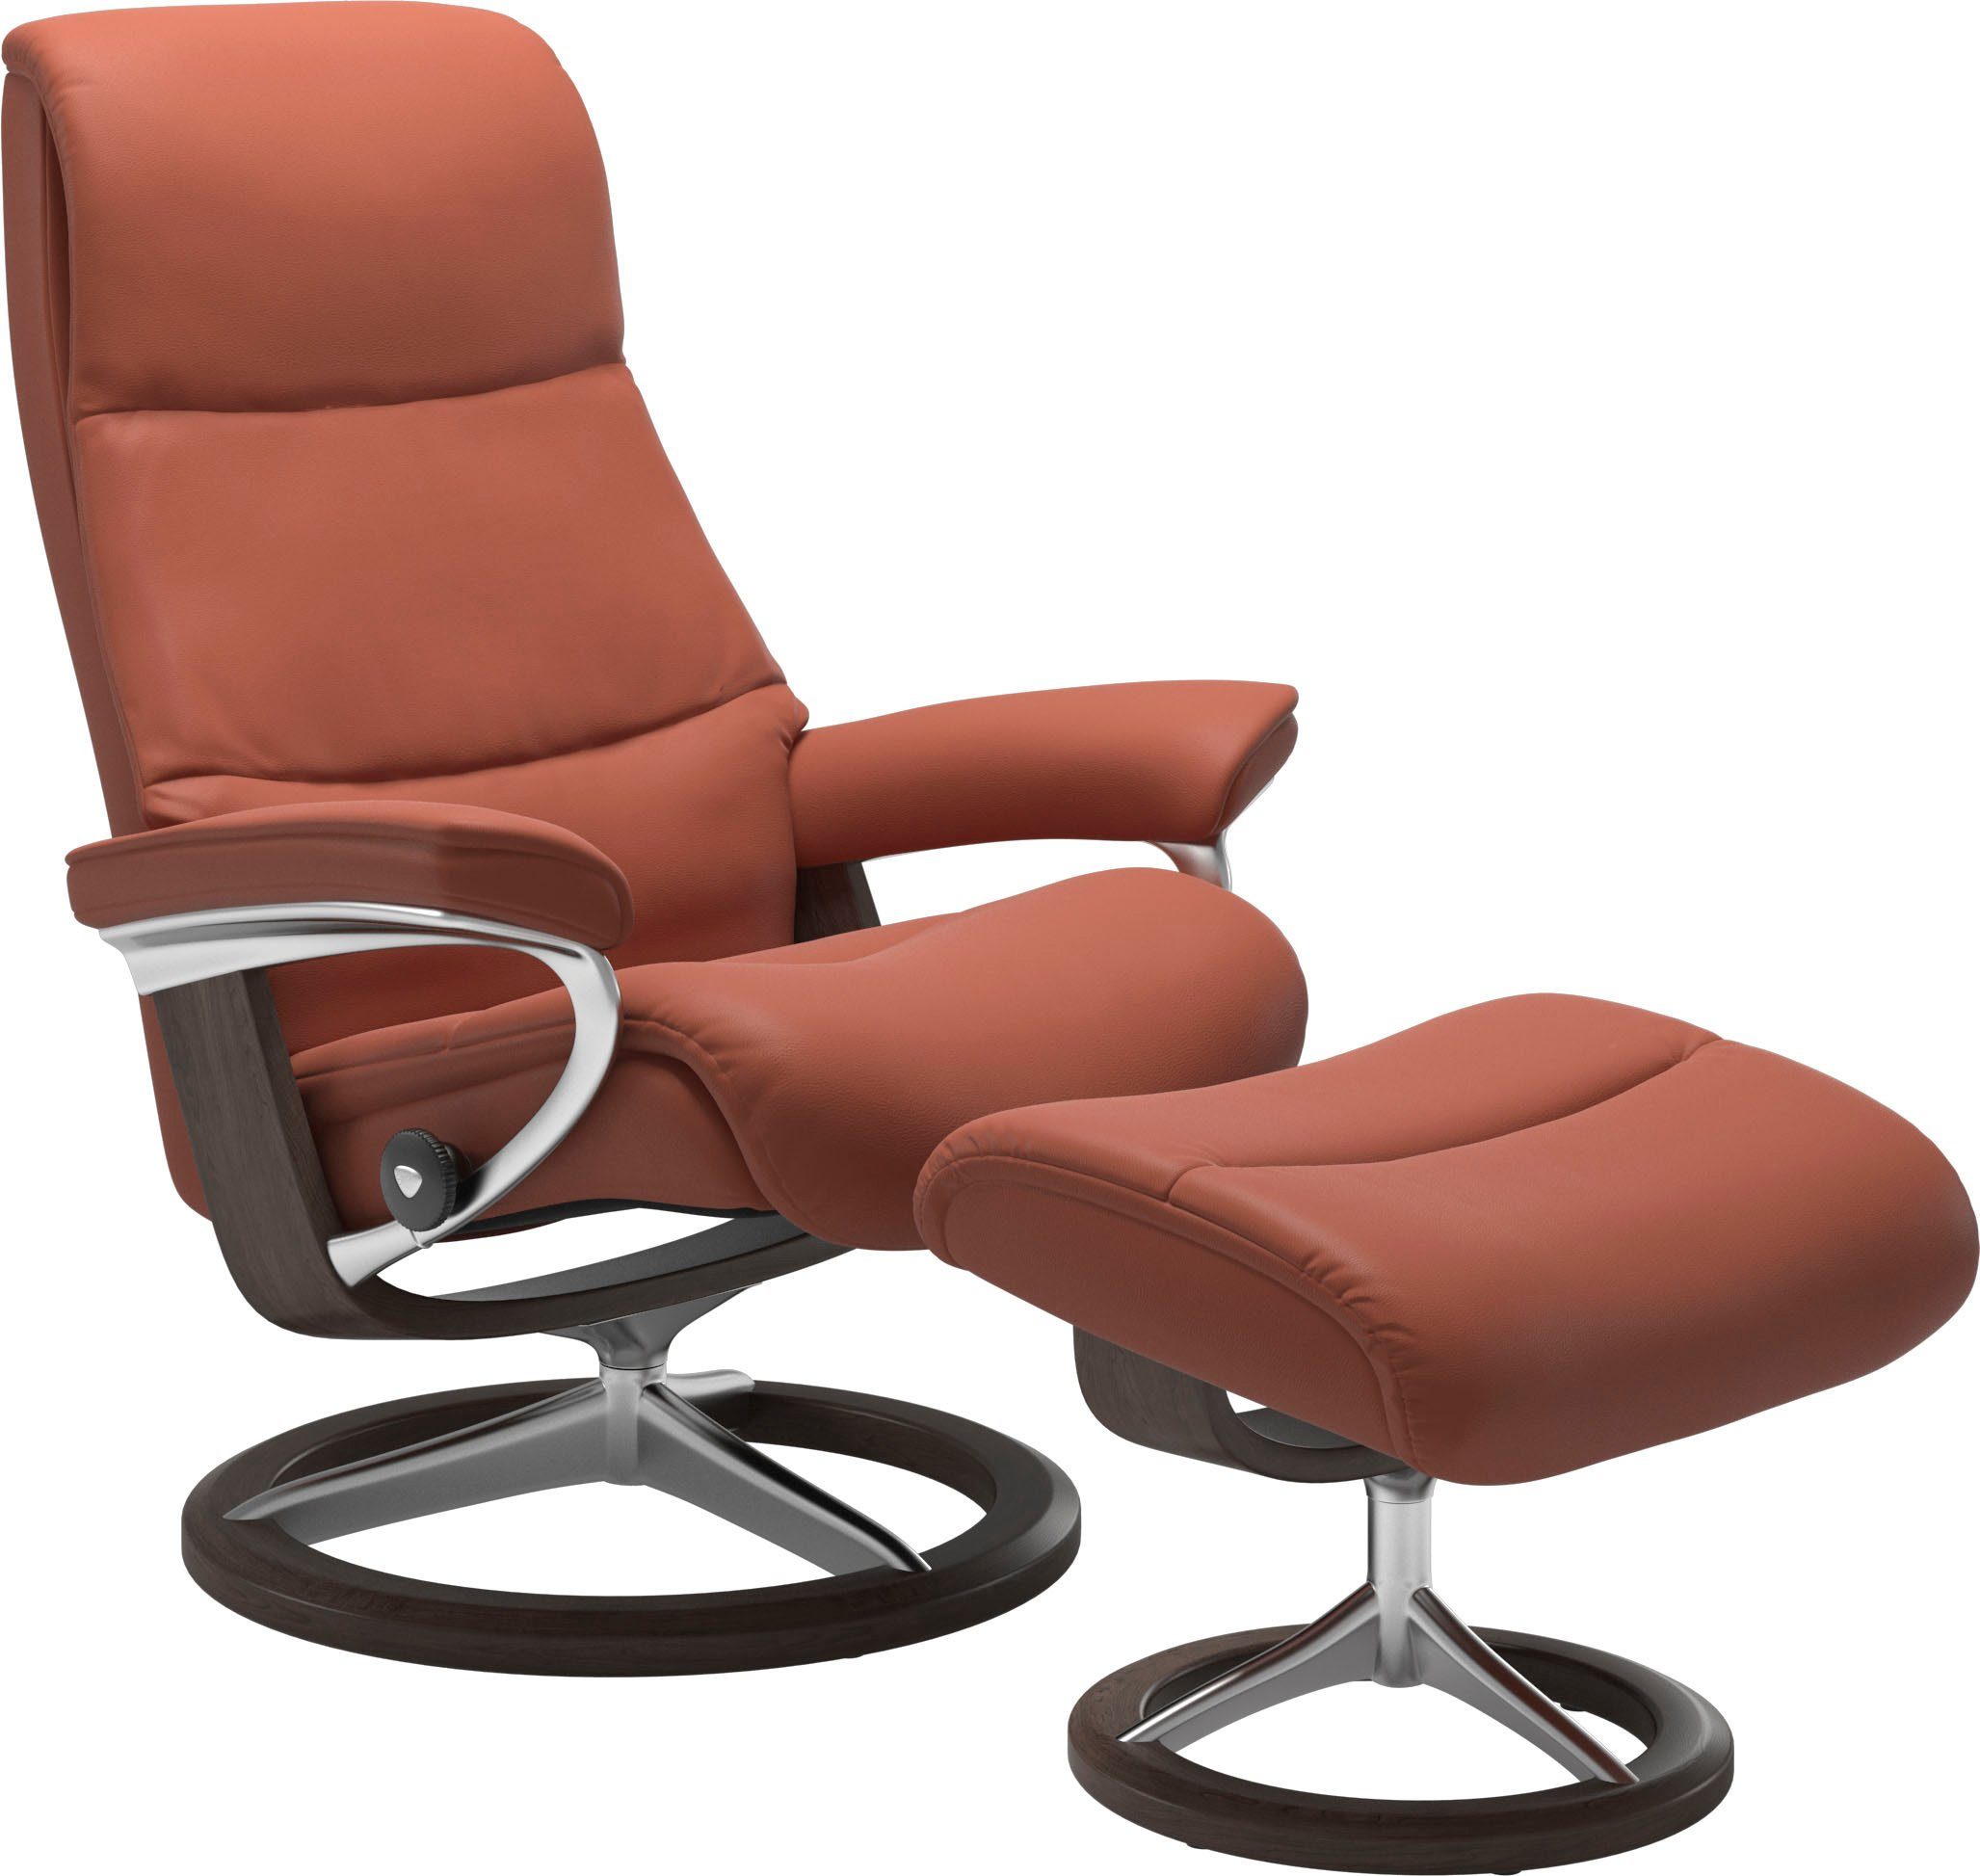 Größe S,Gestell Stressless® mit Base, Signature Wenge View, Relaxsessel